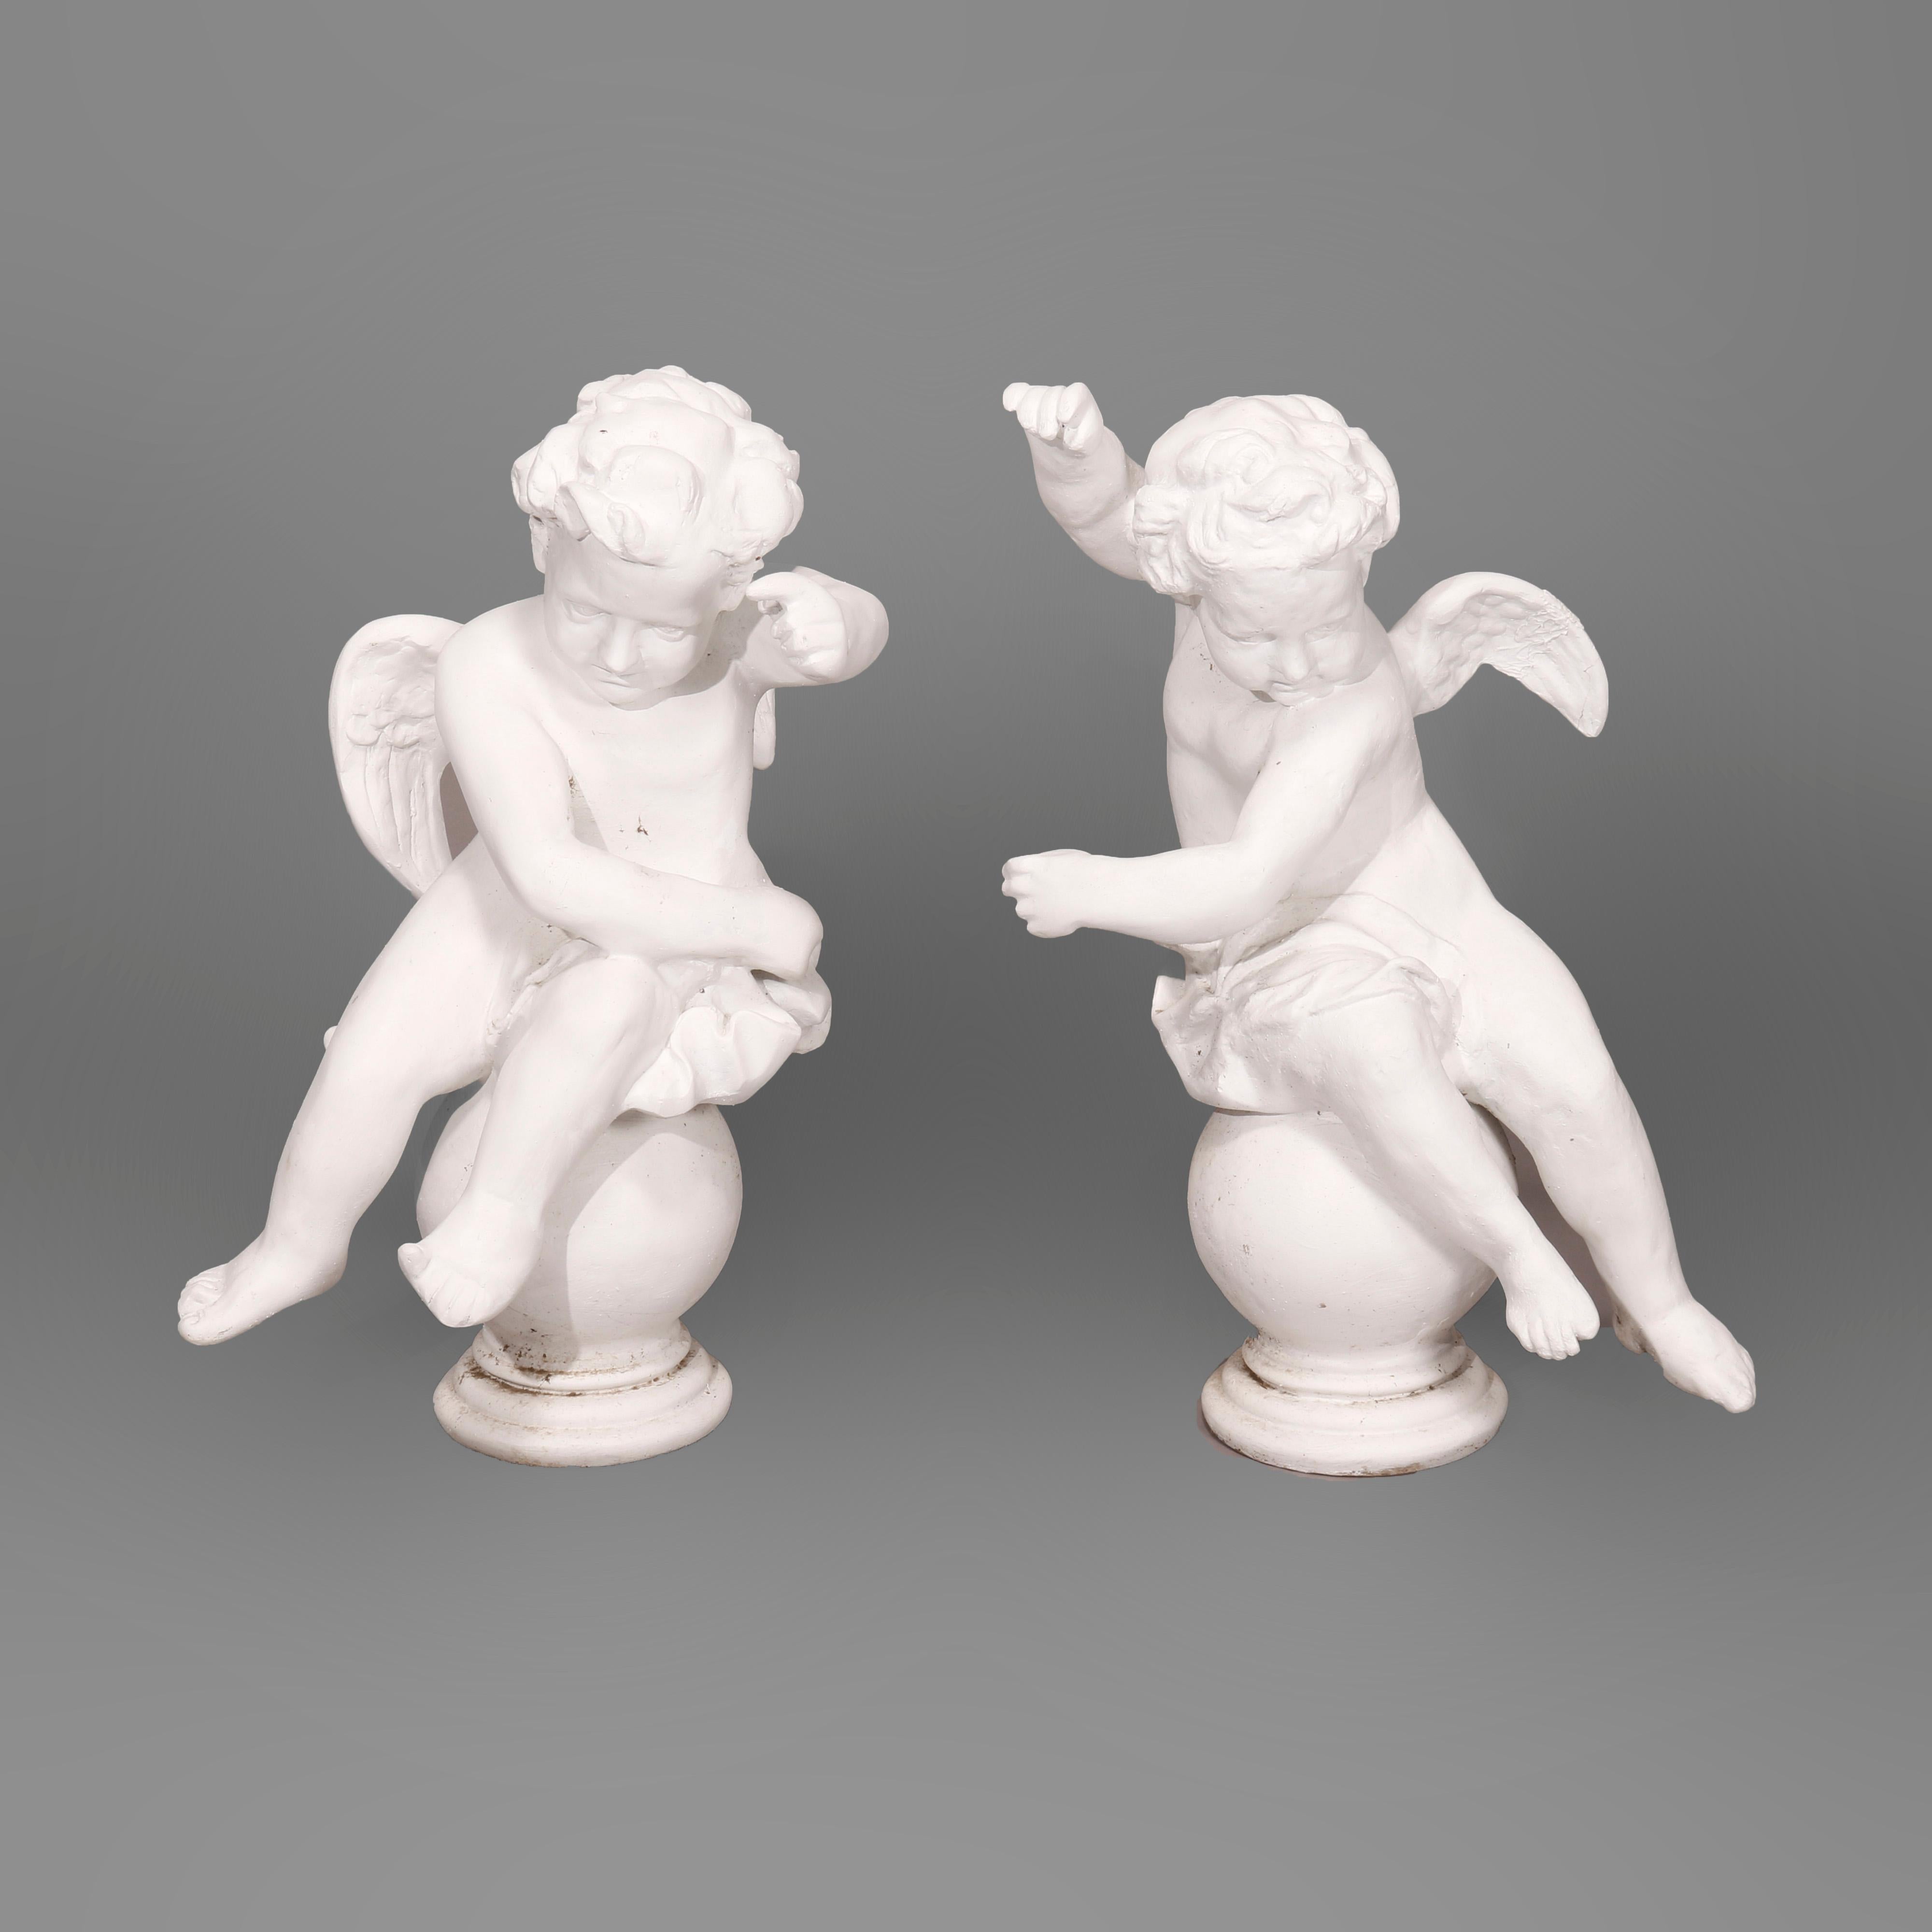 A pair of large Classical garden statues offer winged putti form in composition resin, 20th century

Measures - 31'' H x 22'' W x 18.5'' D.

Catalogue Note: Ask about DISCOUNTED DELIVERY RATES available to most regions within 1,500 miles of New York.